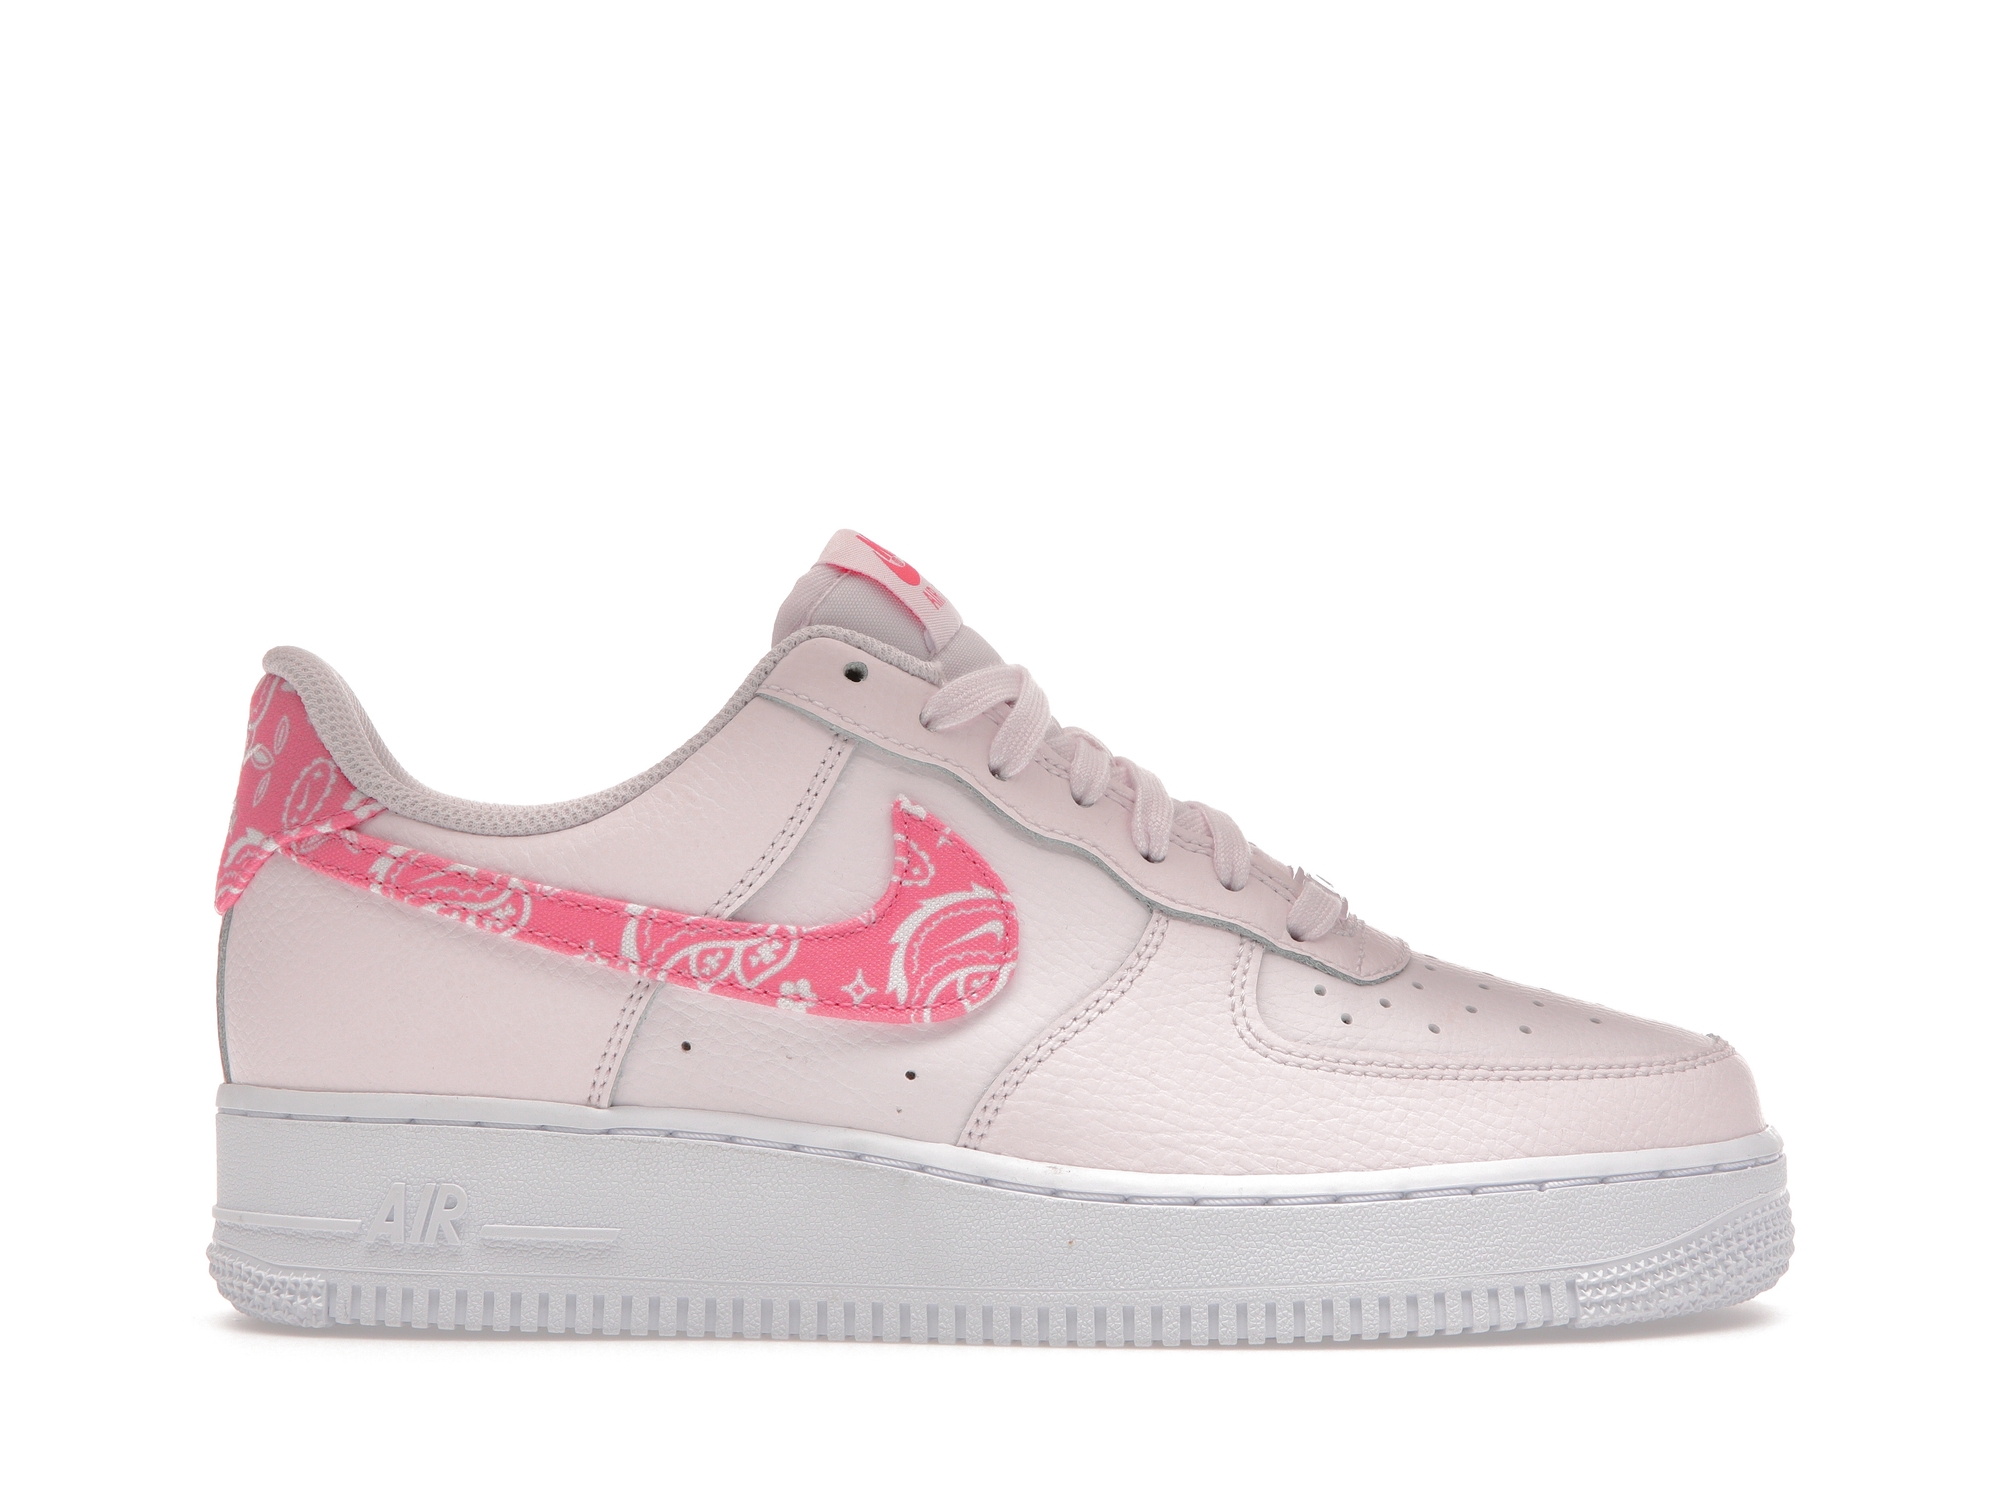 Nike Air Force 1 Low '07 Paisley Pack Pink (Women's) - FD1448-664 - US